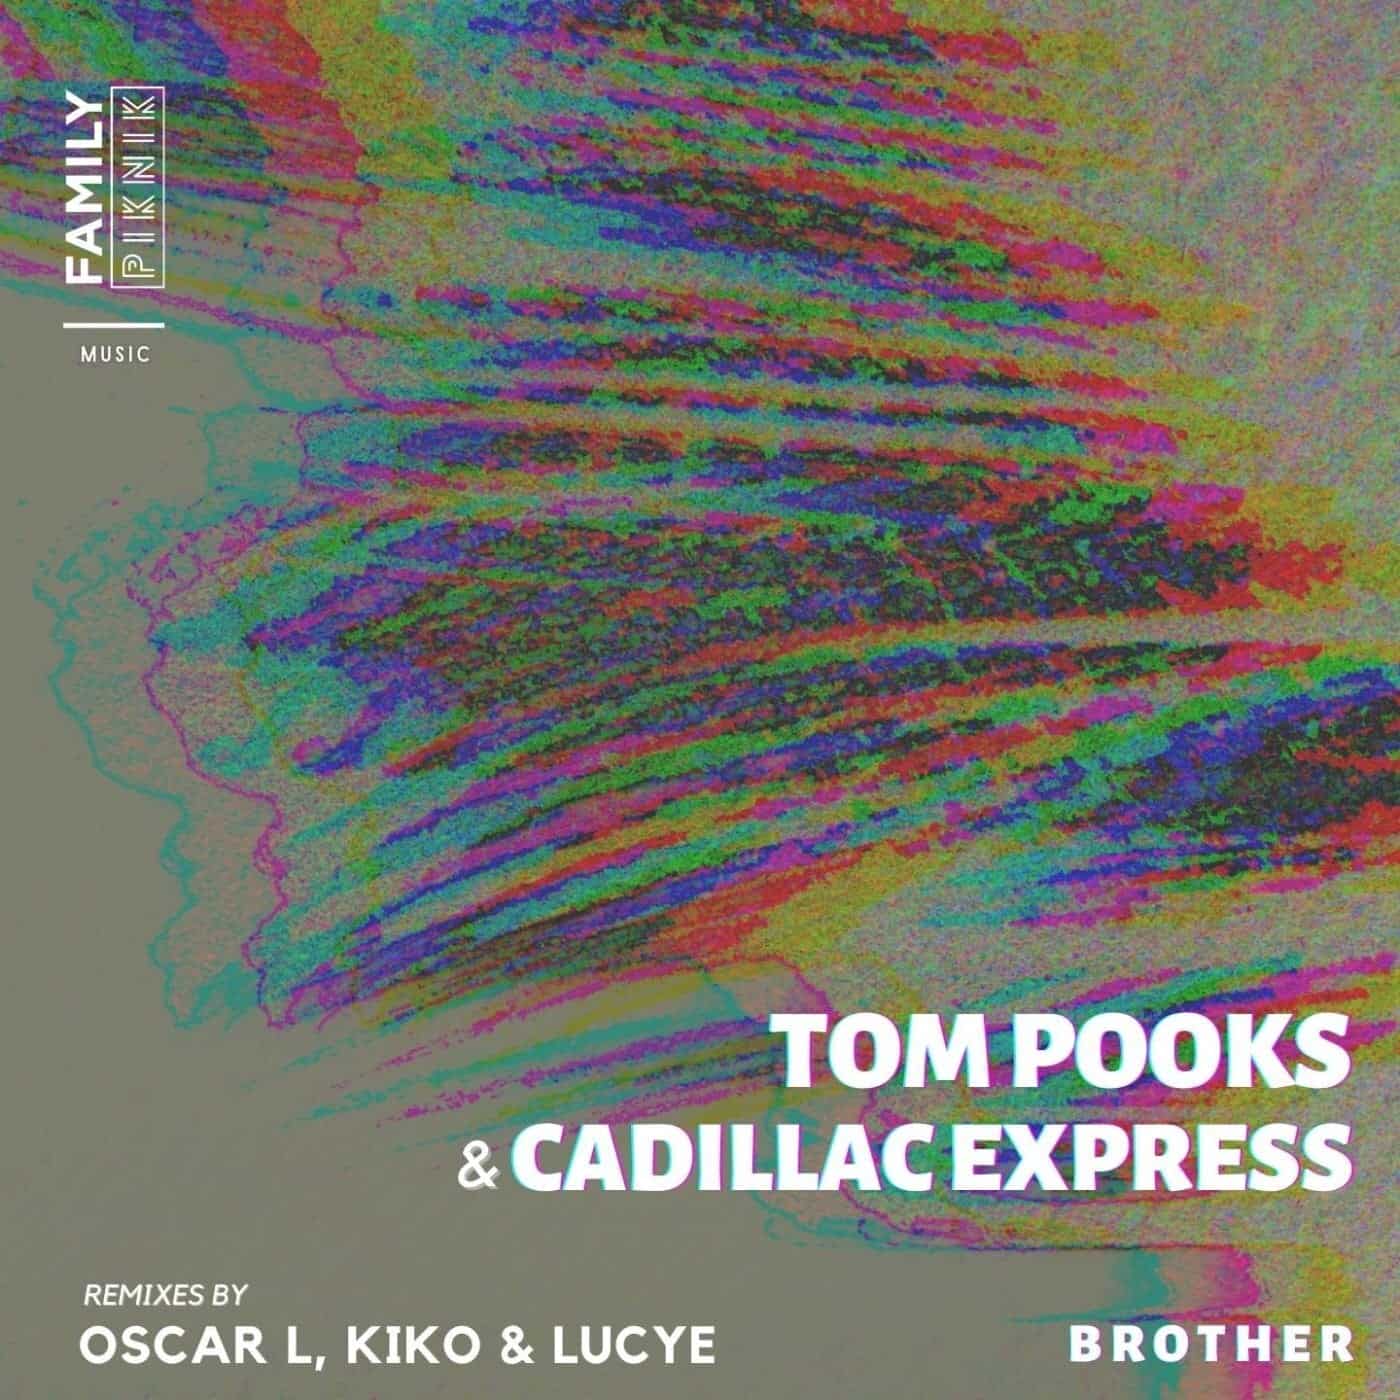 Download Tom Pooks, Cadillac Express - Brother on Electrobuzz